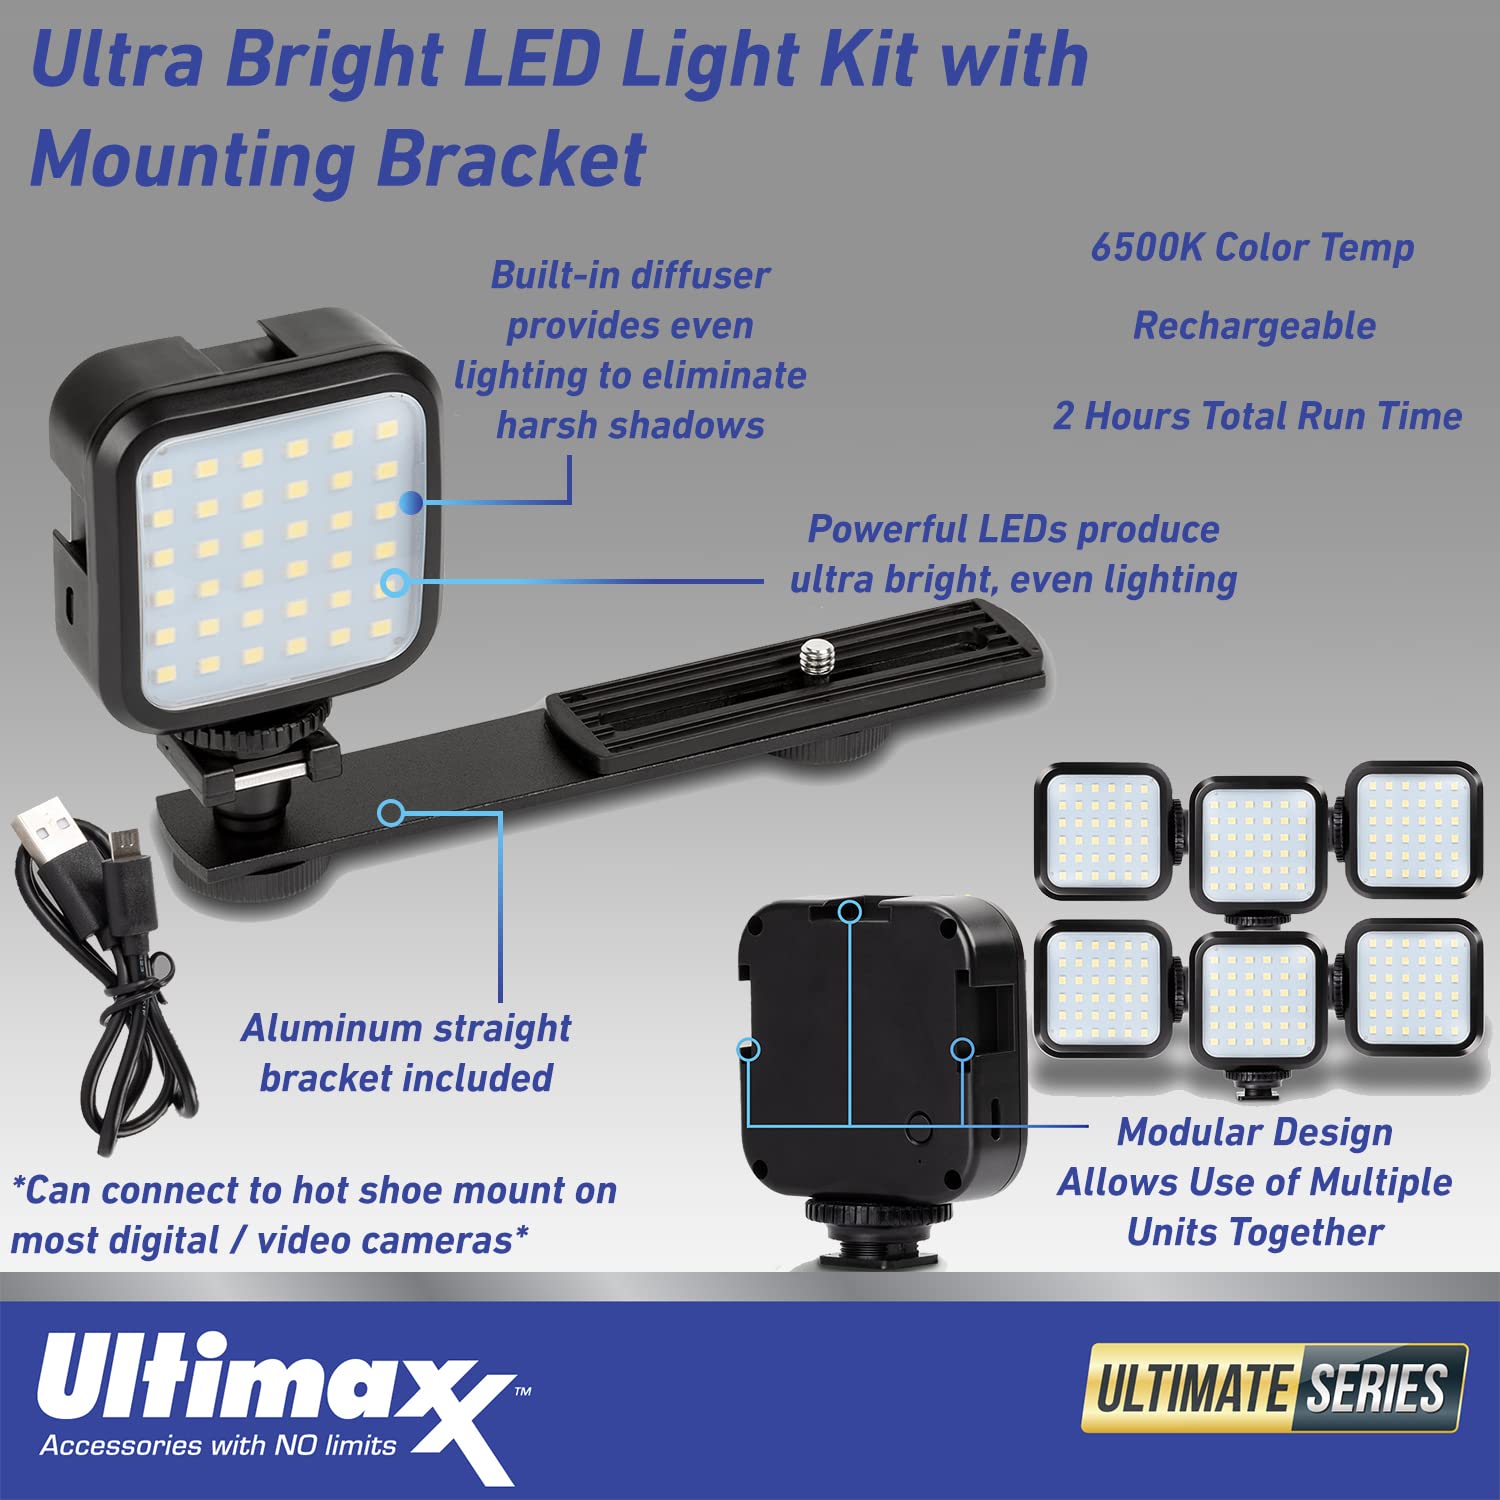 Ultimaxx Essential ZV-1F Camera Bundle (White) - Includes: 64GB Extreme Memory Card, 4PC Macro Close-Up Filter Kit, Replacement Battery, Ultra-Bright LED Light Kit & More (20pc Bundle)